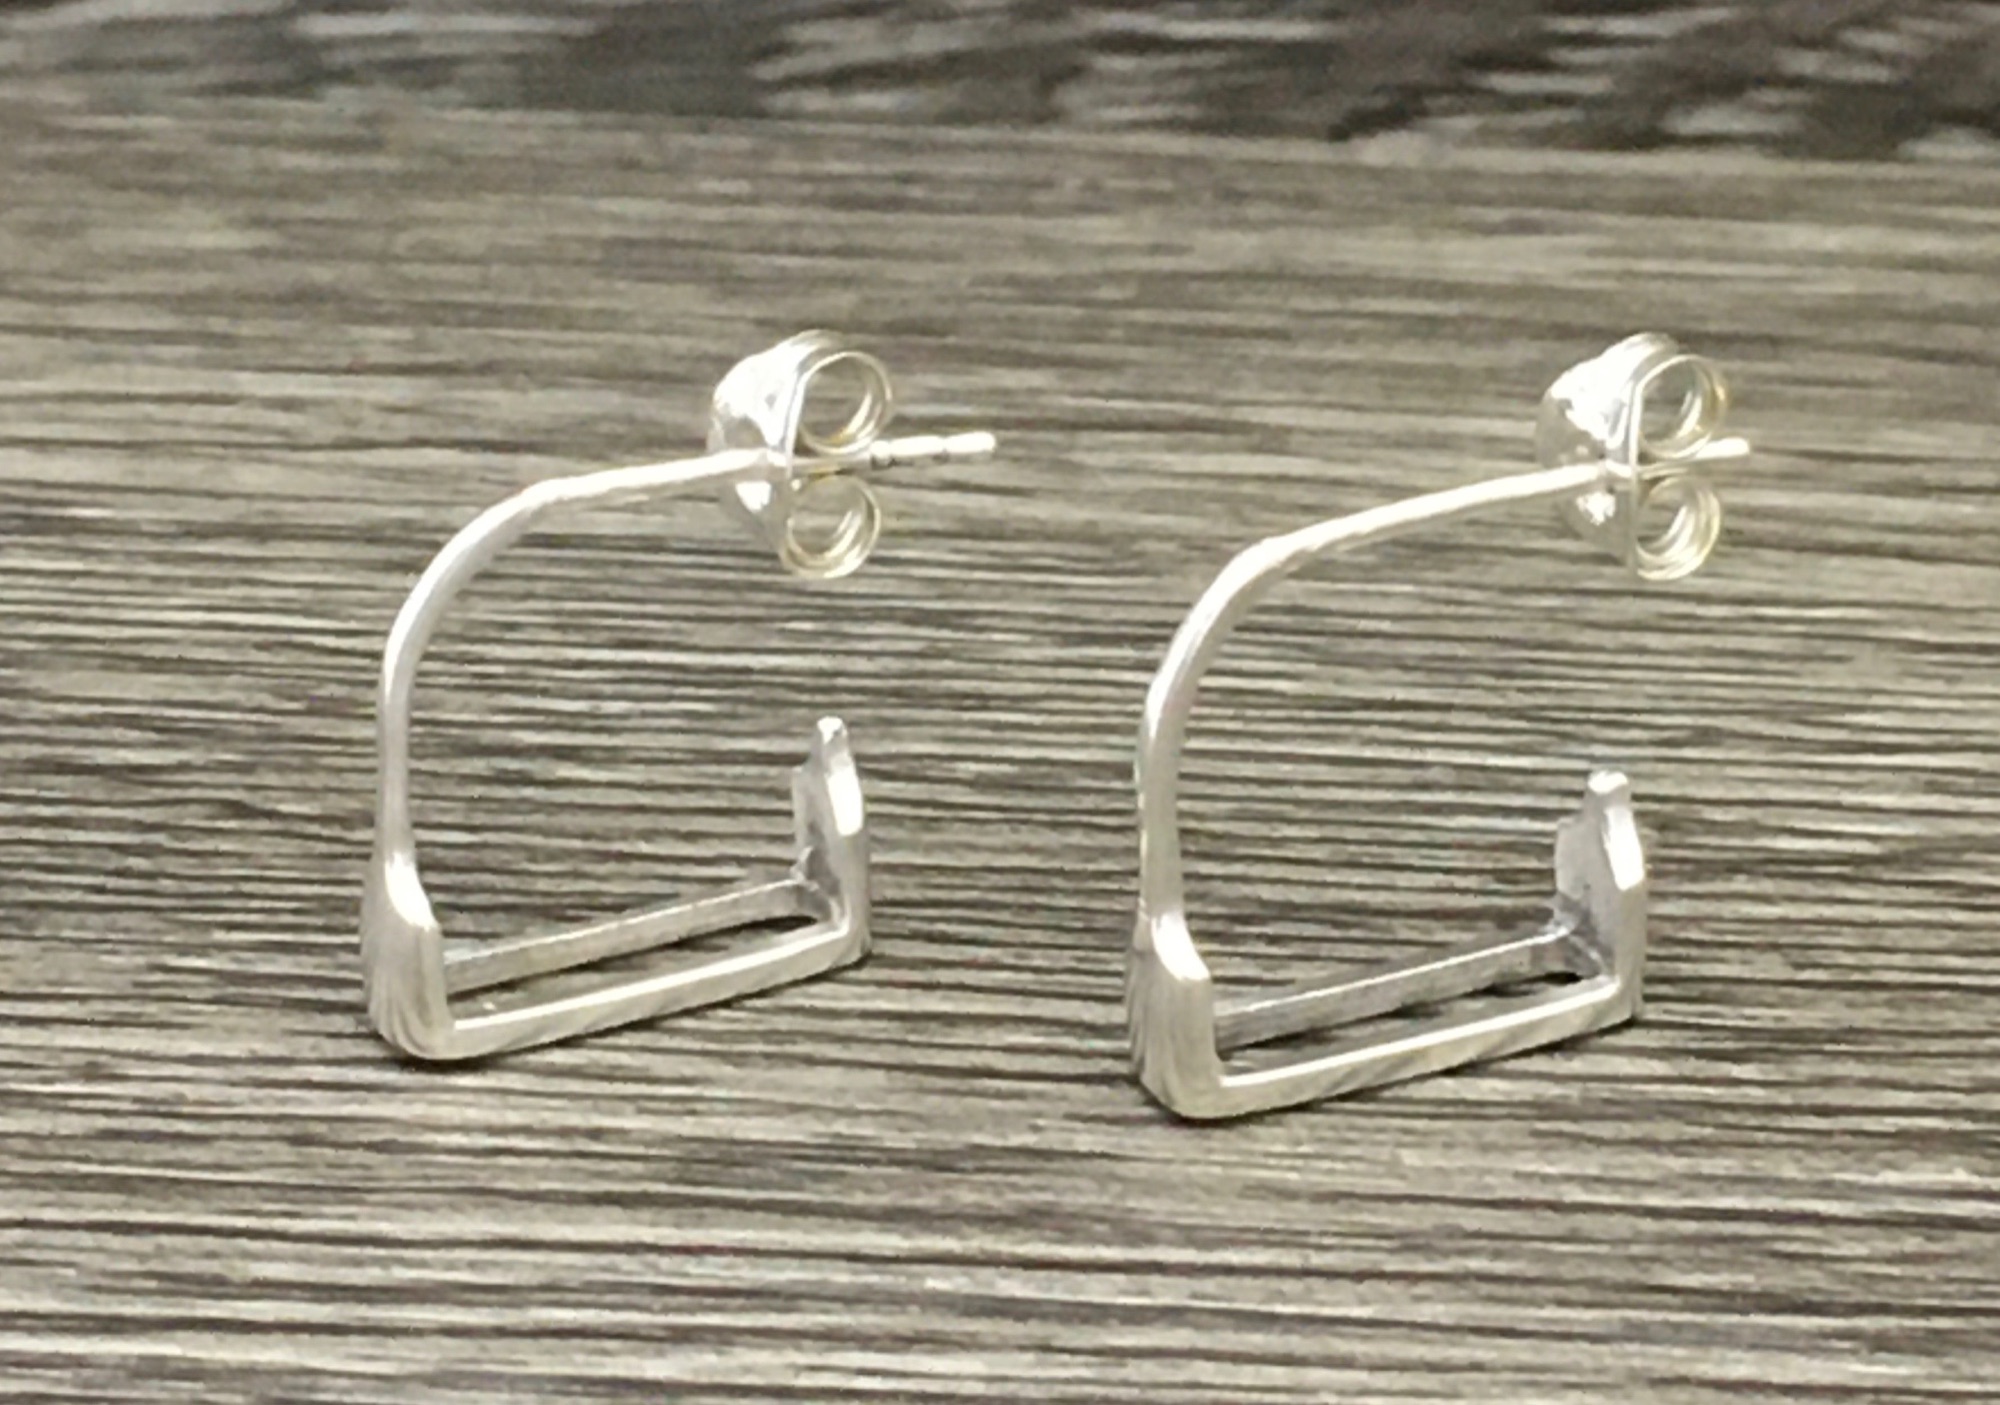 A pair of sterling silver stirrup earrings